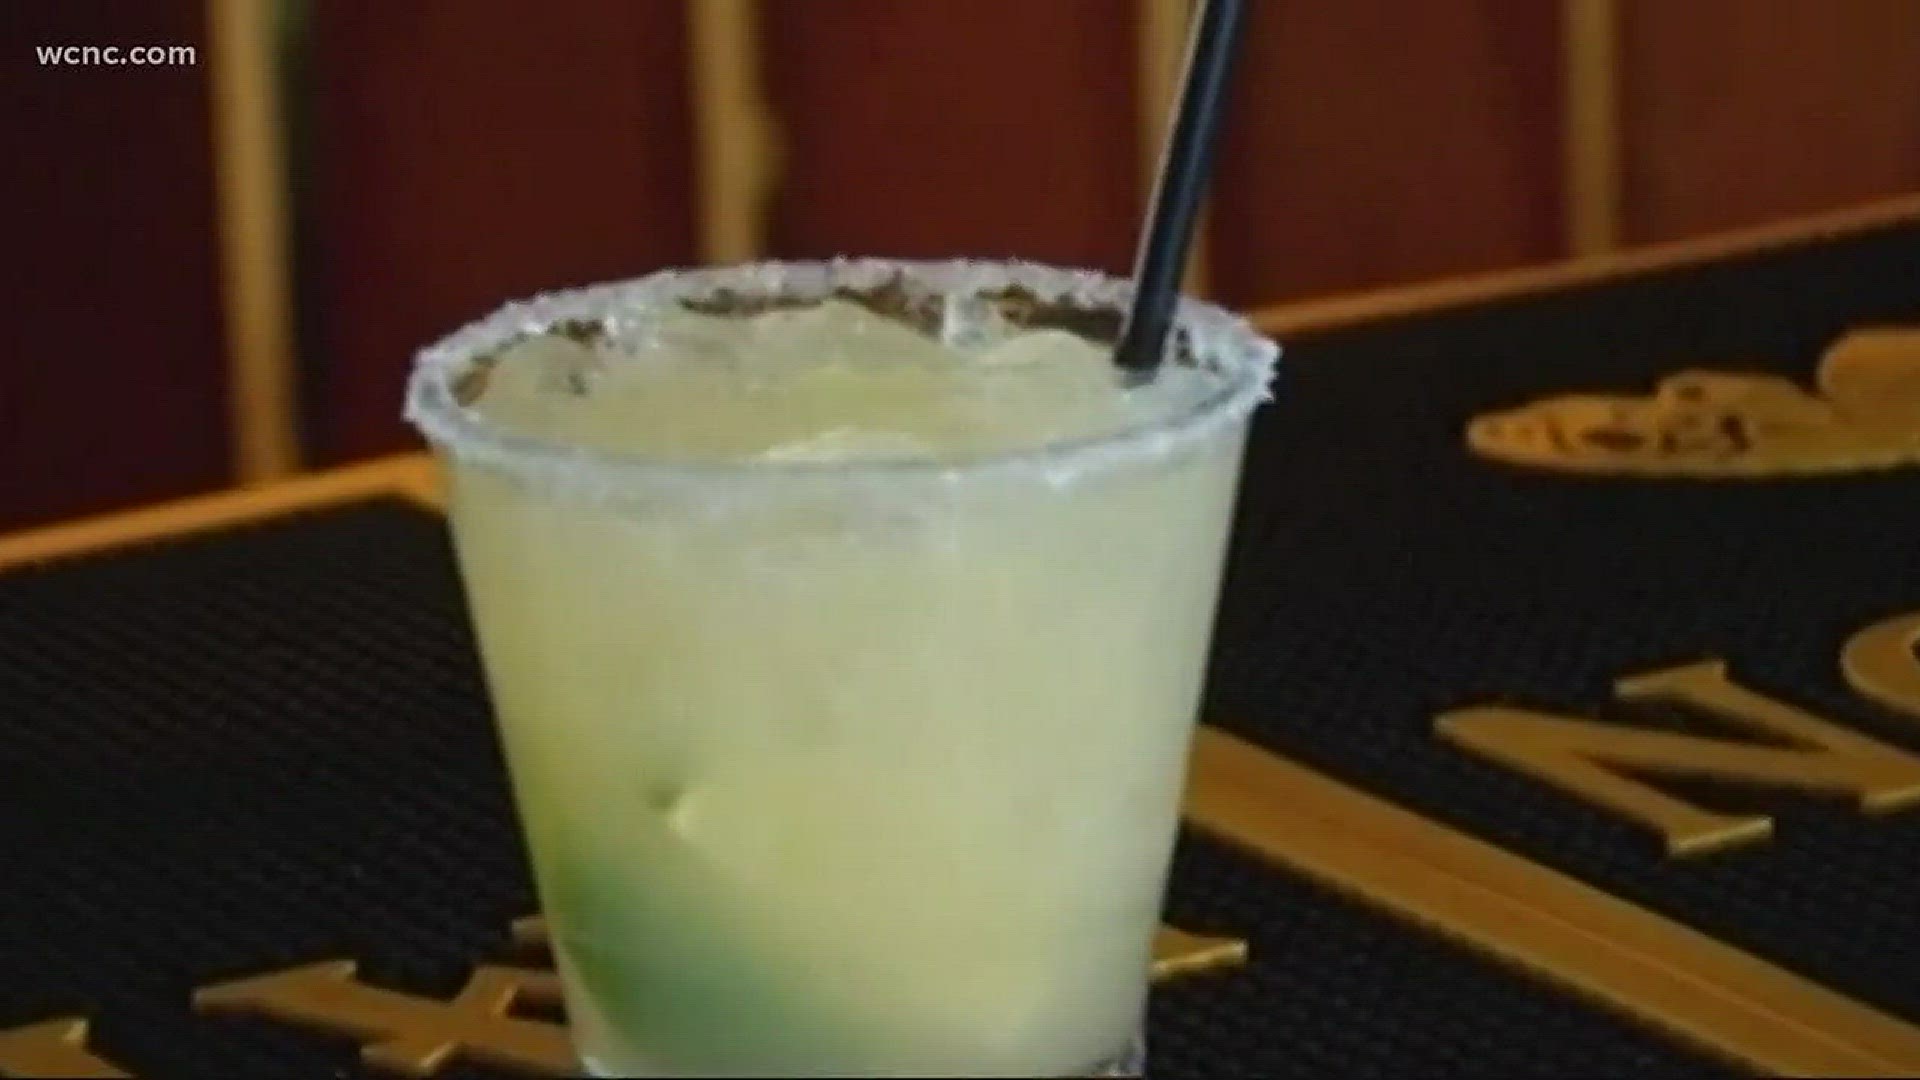 Thursday is National Margarita Day! Here's where you can score a great deal on a drink to celebrate.